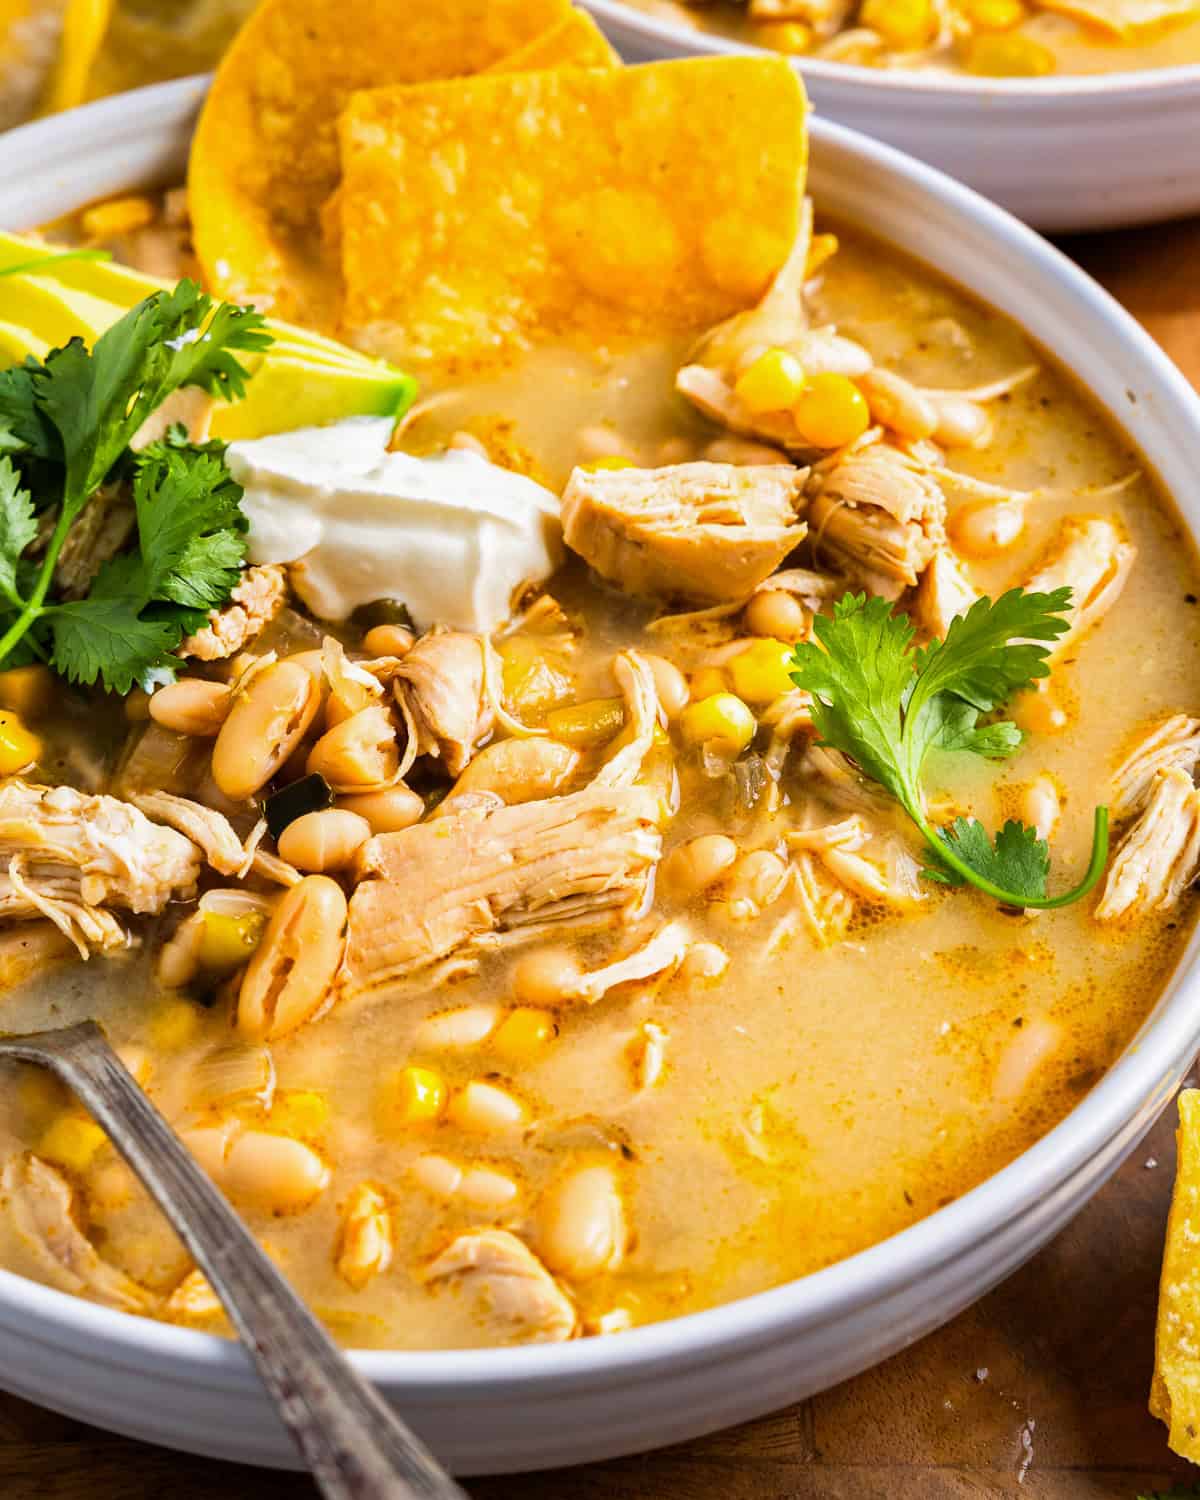 A bowl of white chili with chicken.